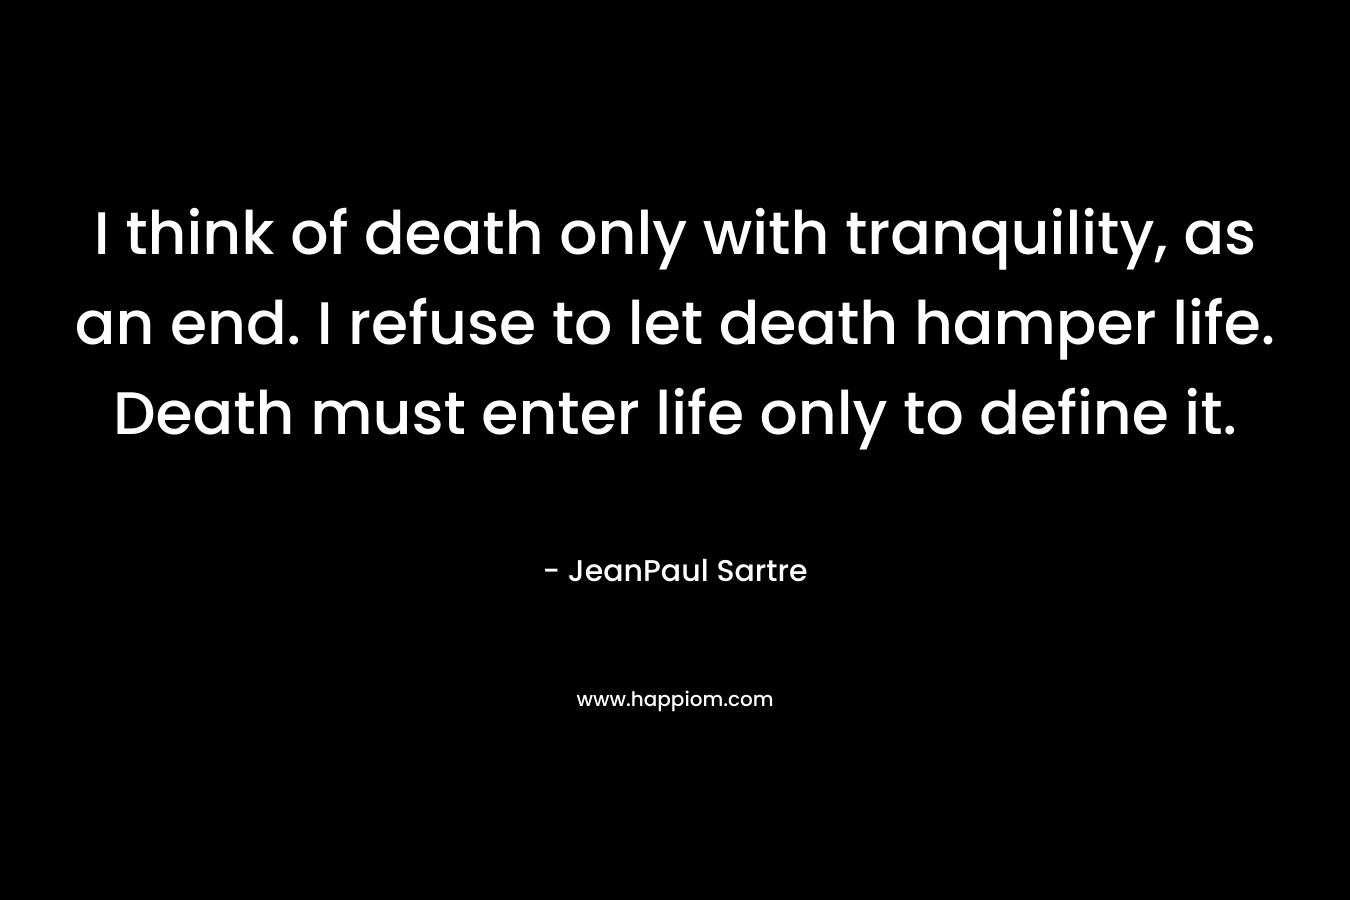 I think of death only with tranquility, as an end. I refuse to let death hamper life. Death must enter life only to define it. – JeanPaul Sartre